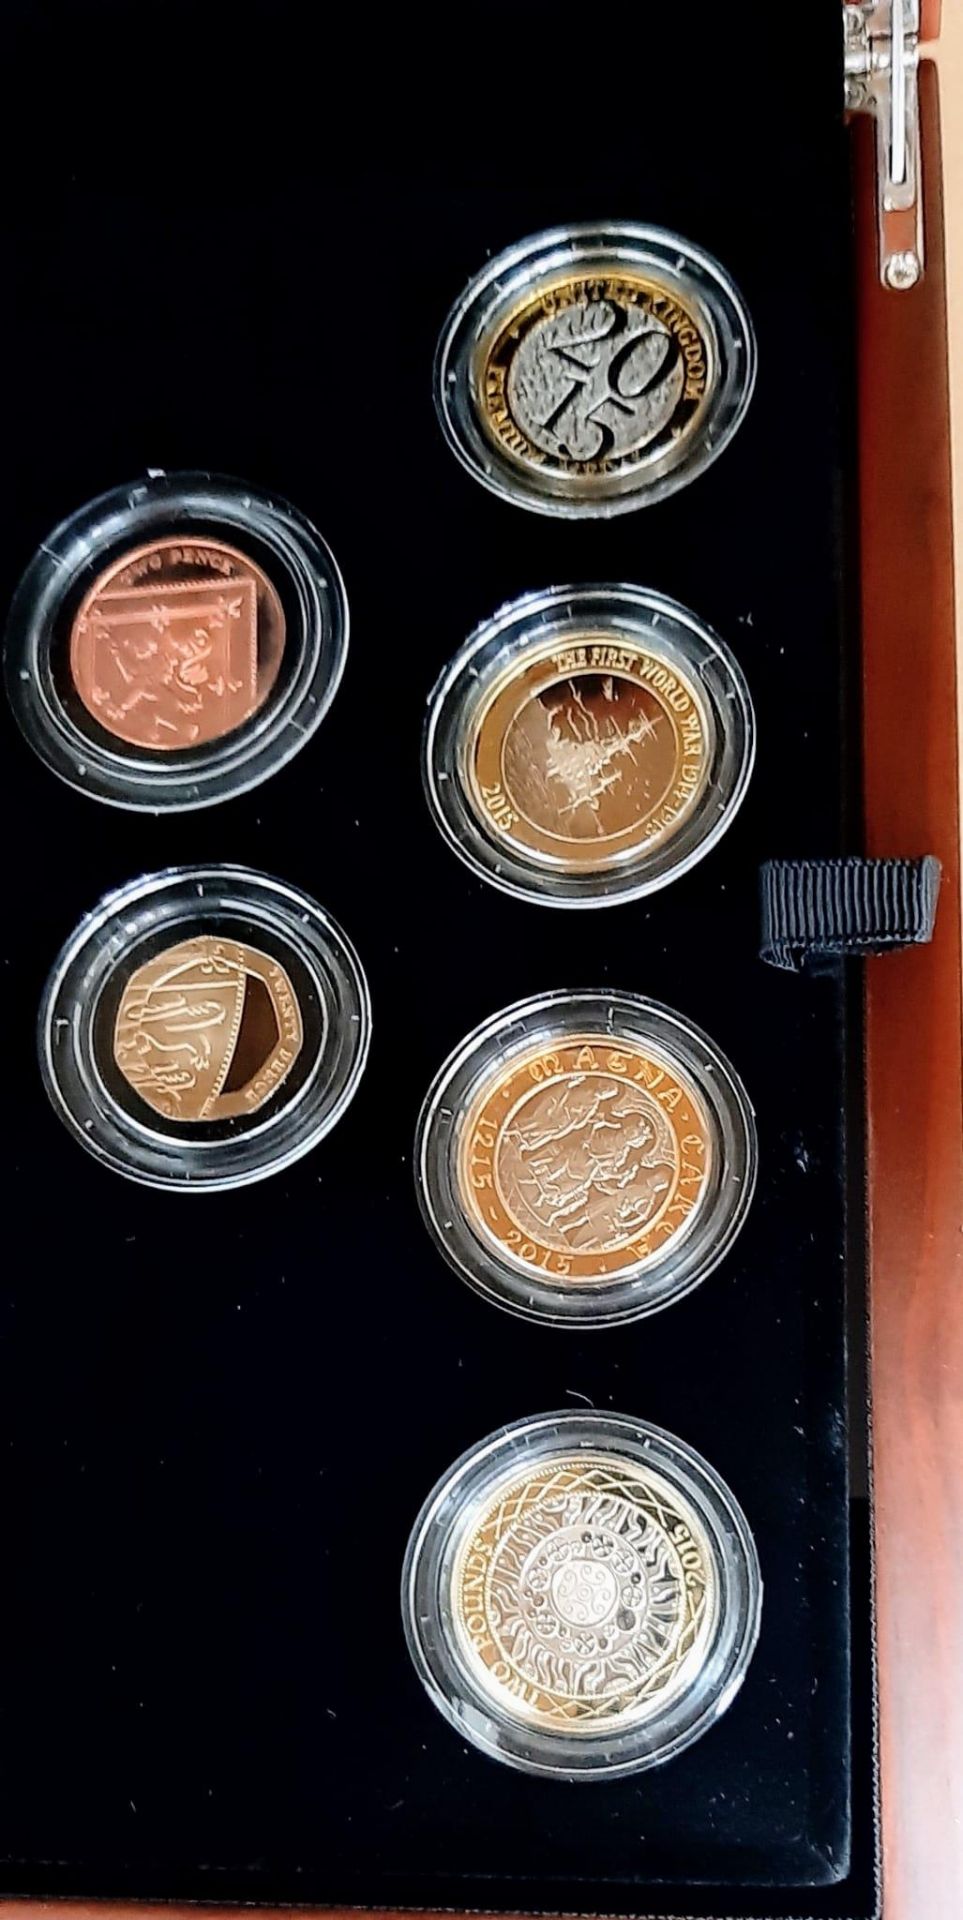 The Royal Mint 2015 United Kingdom Premium Proof 14 Coin Set. Slight marks on exterior box but the - Image 2 of 2